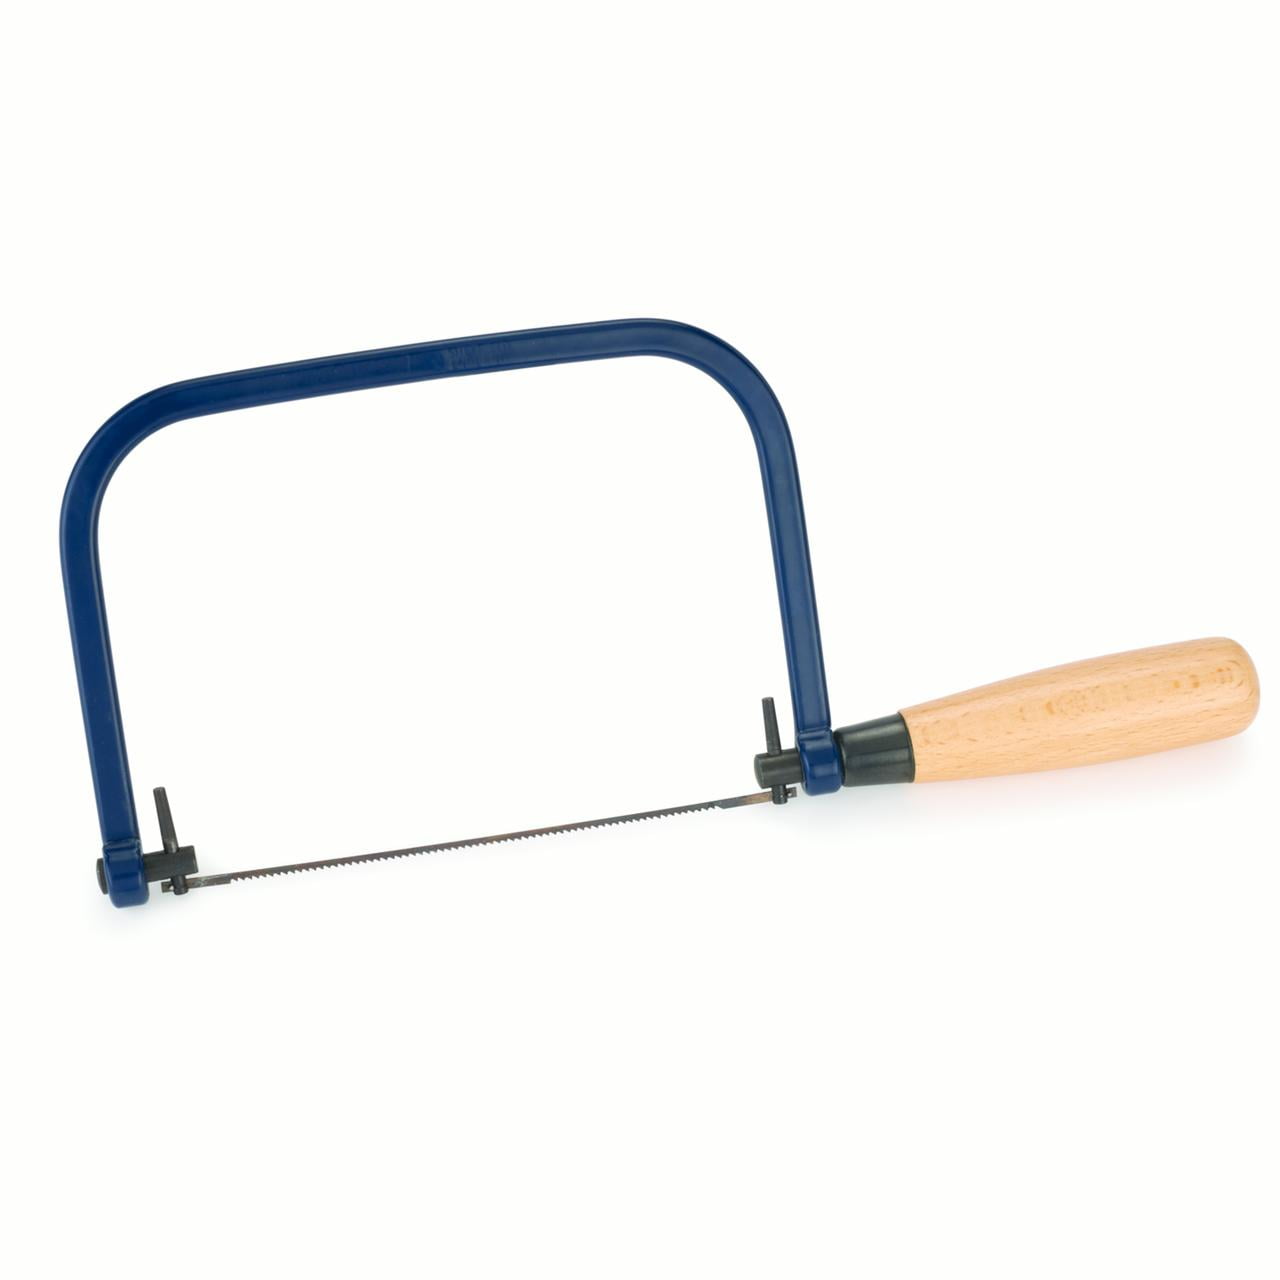 Eclipse Coping Saw; Model 70-CP1R 